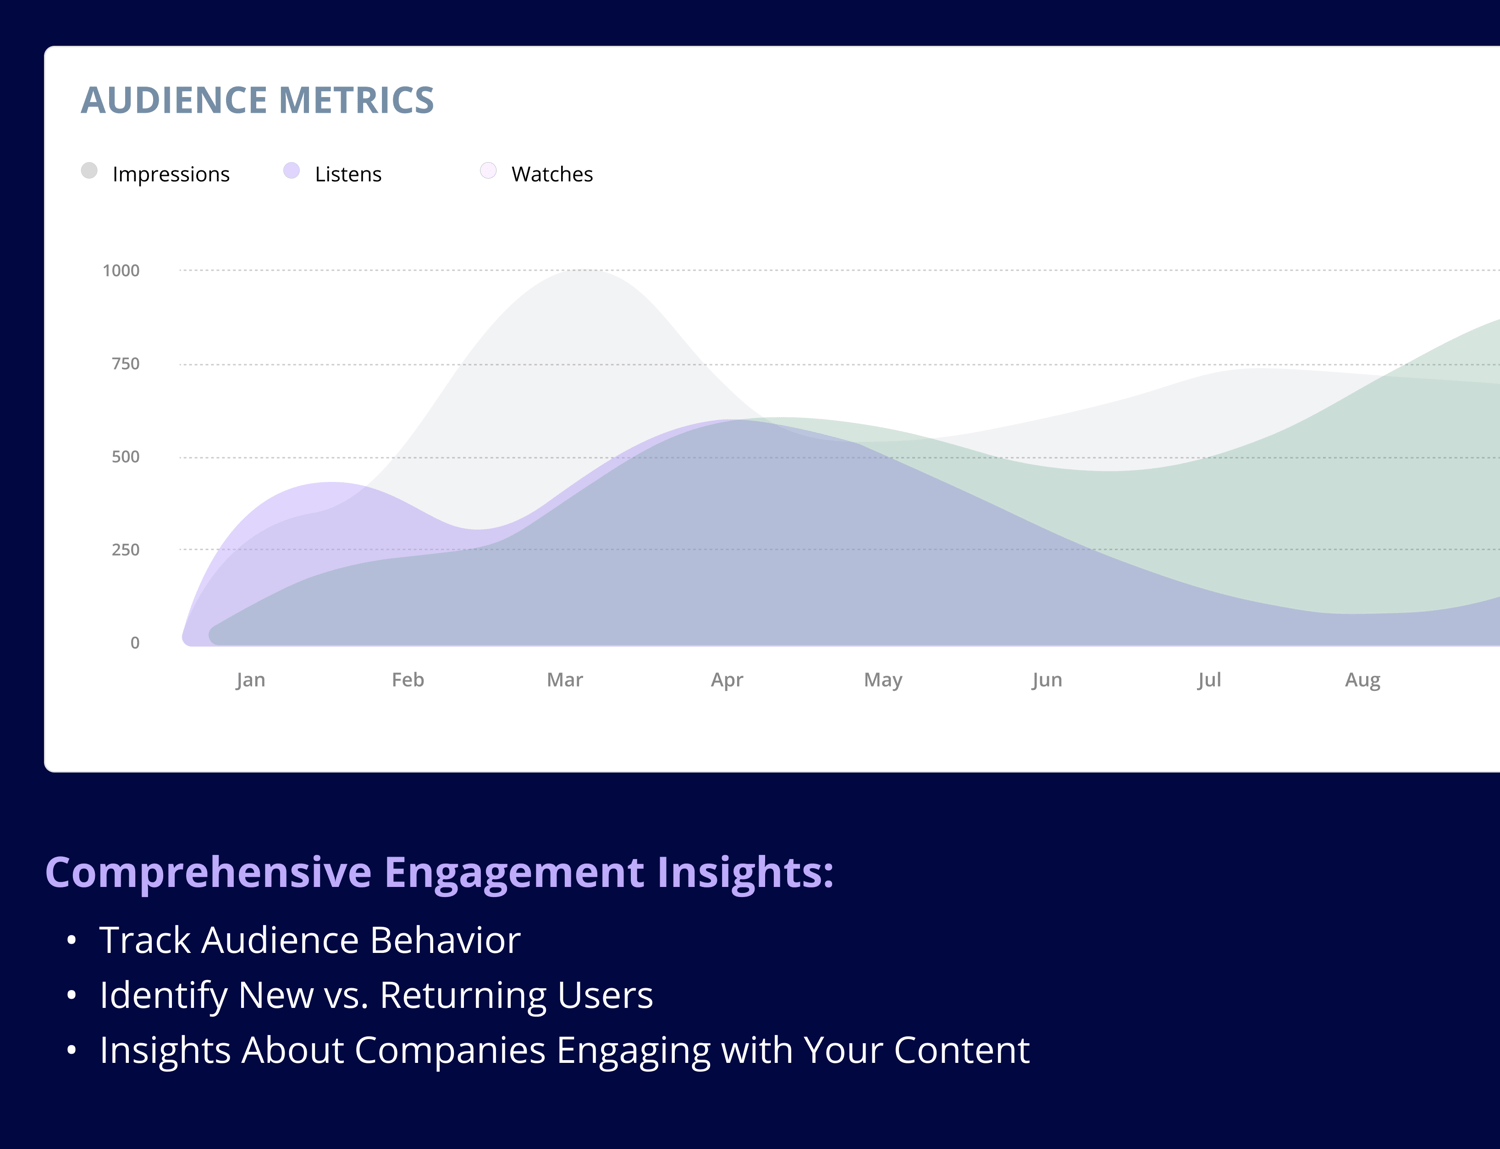 Comprehensive Engagement Insights Graphic